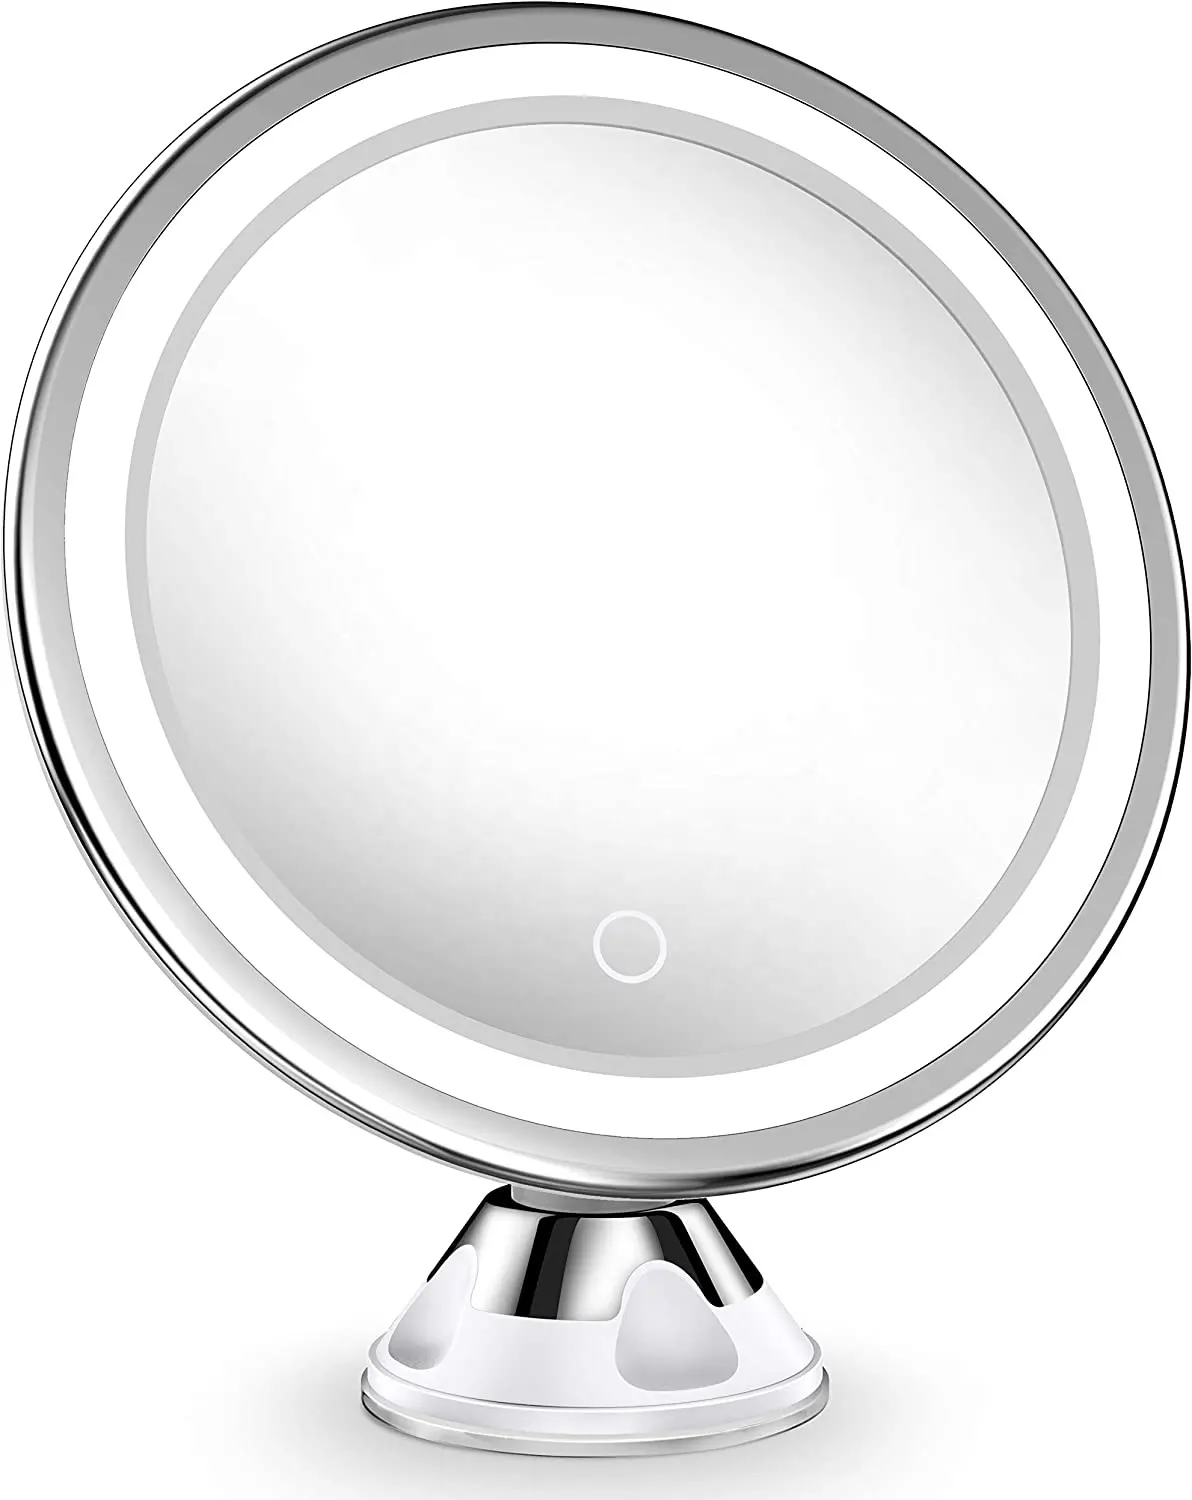 10x Magnifying Lighted Makeup Mirror with Touch Control LED Lights, 360 Degree Rotating, Portable Magnifying Mirror